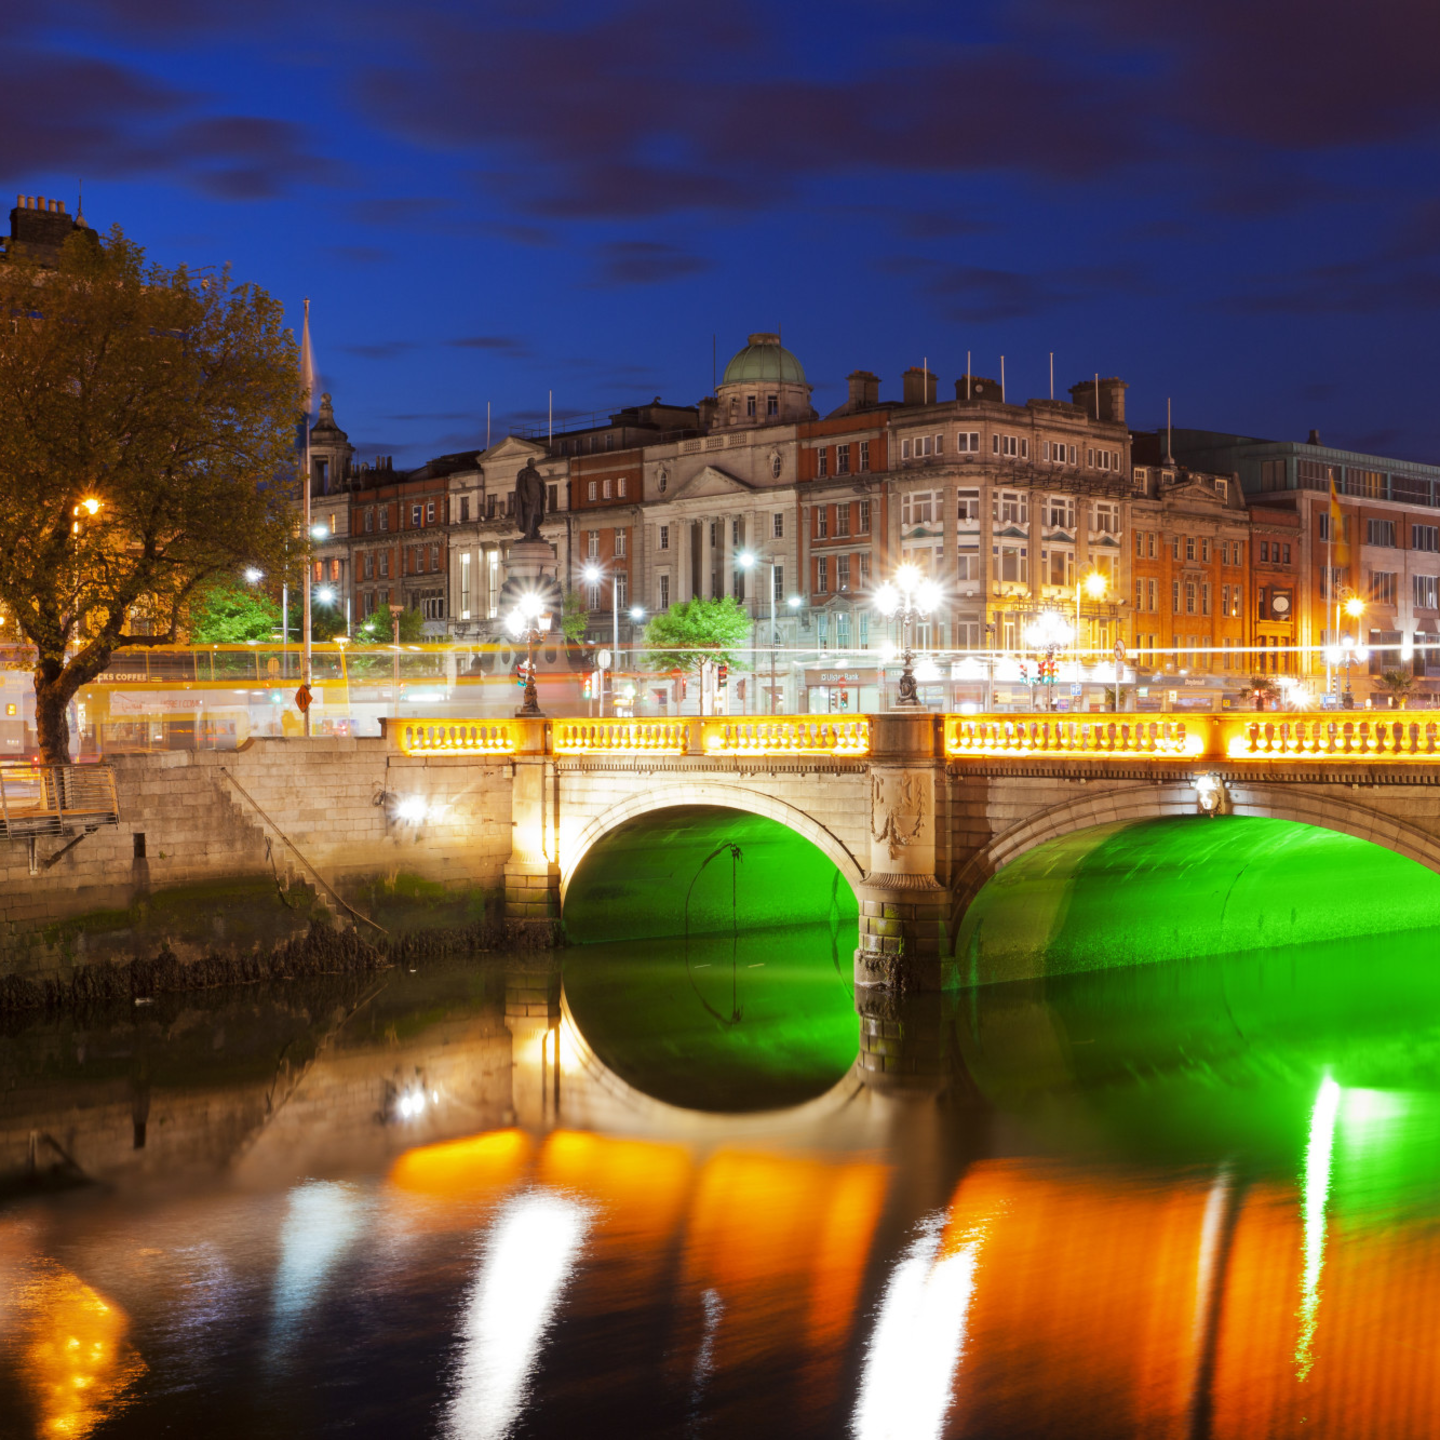 The river liffy in Dublin at night